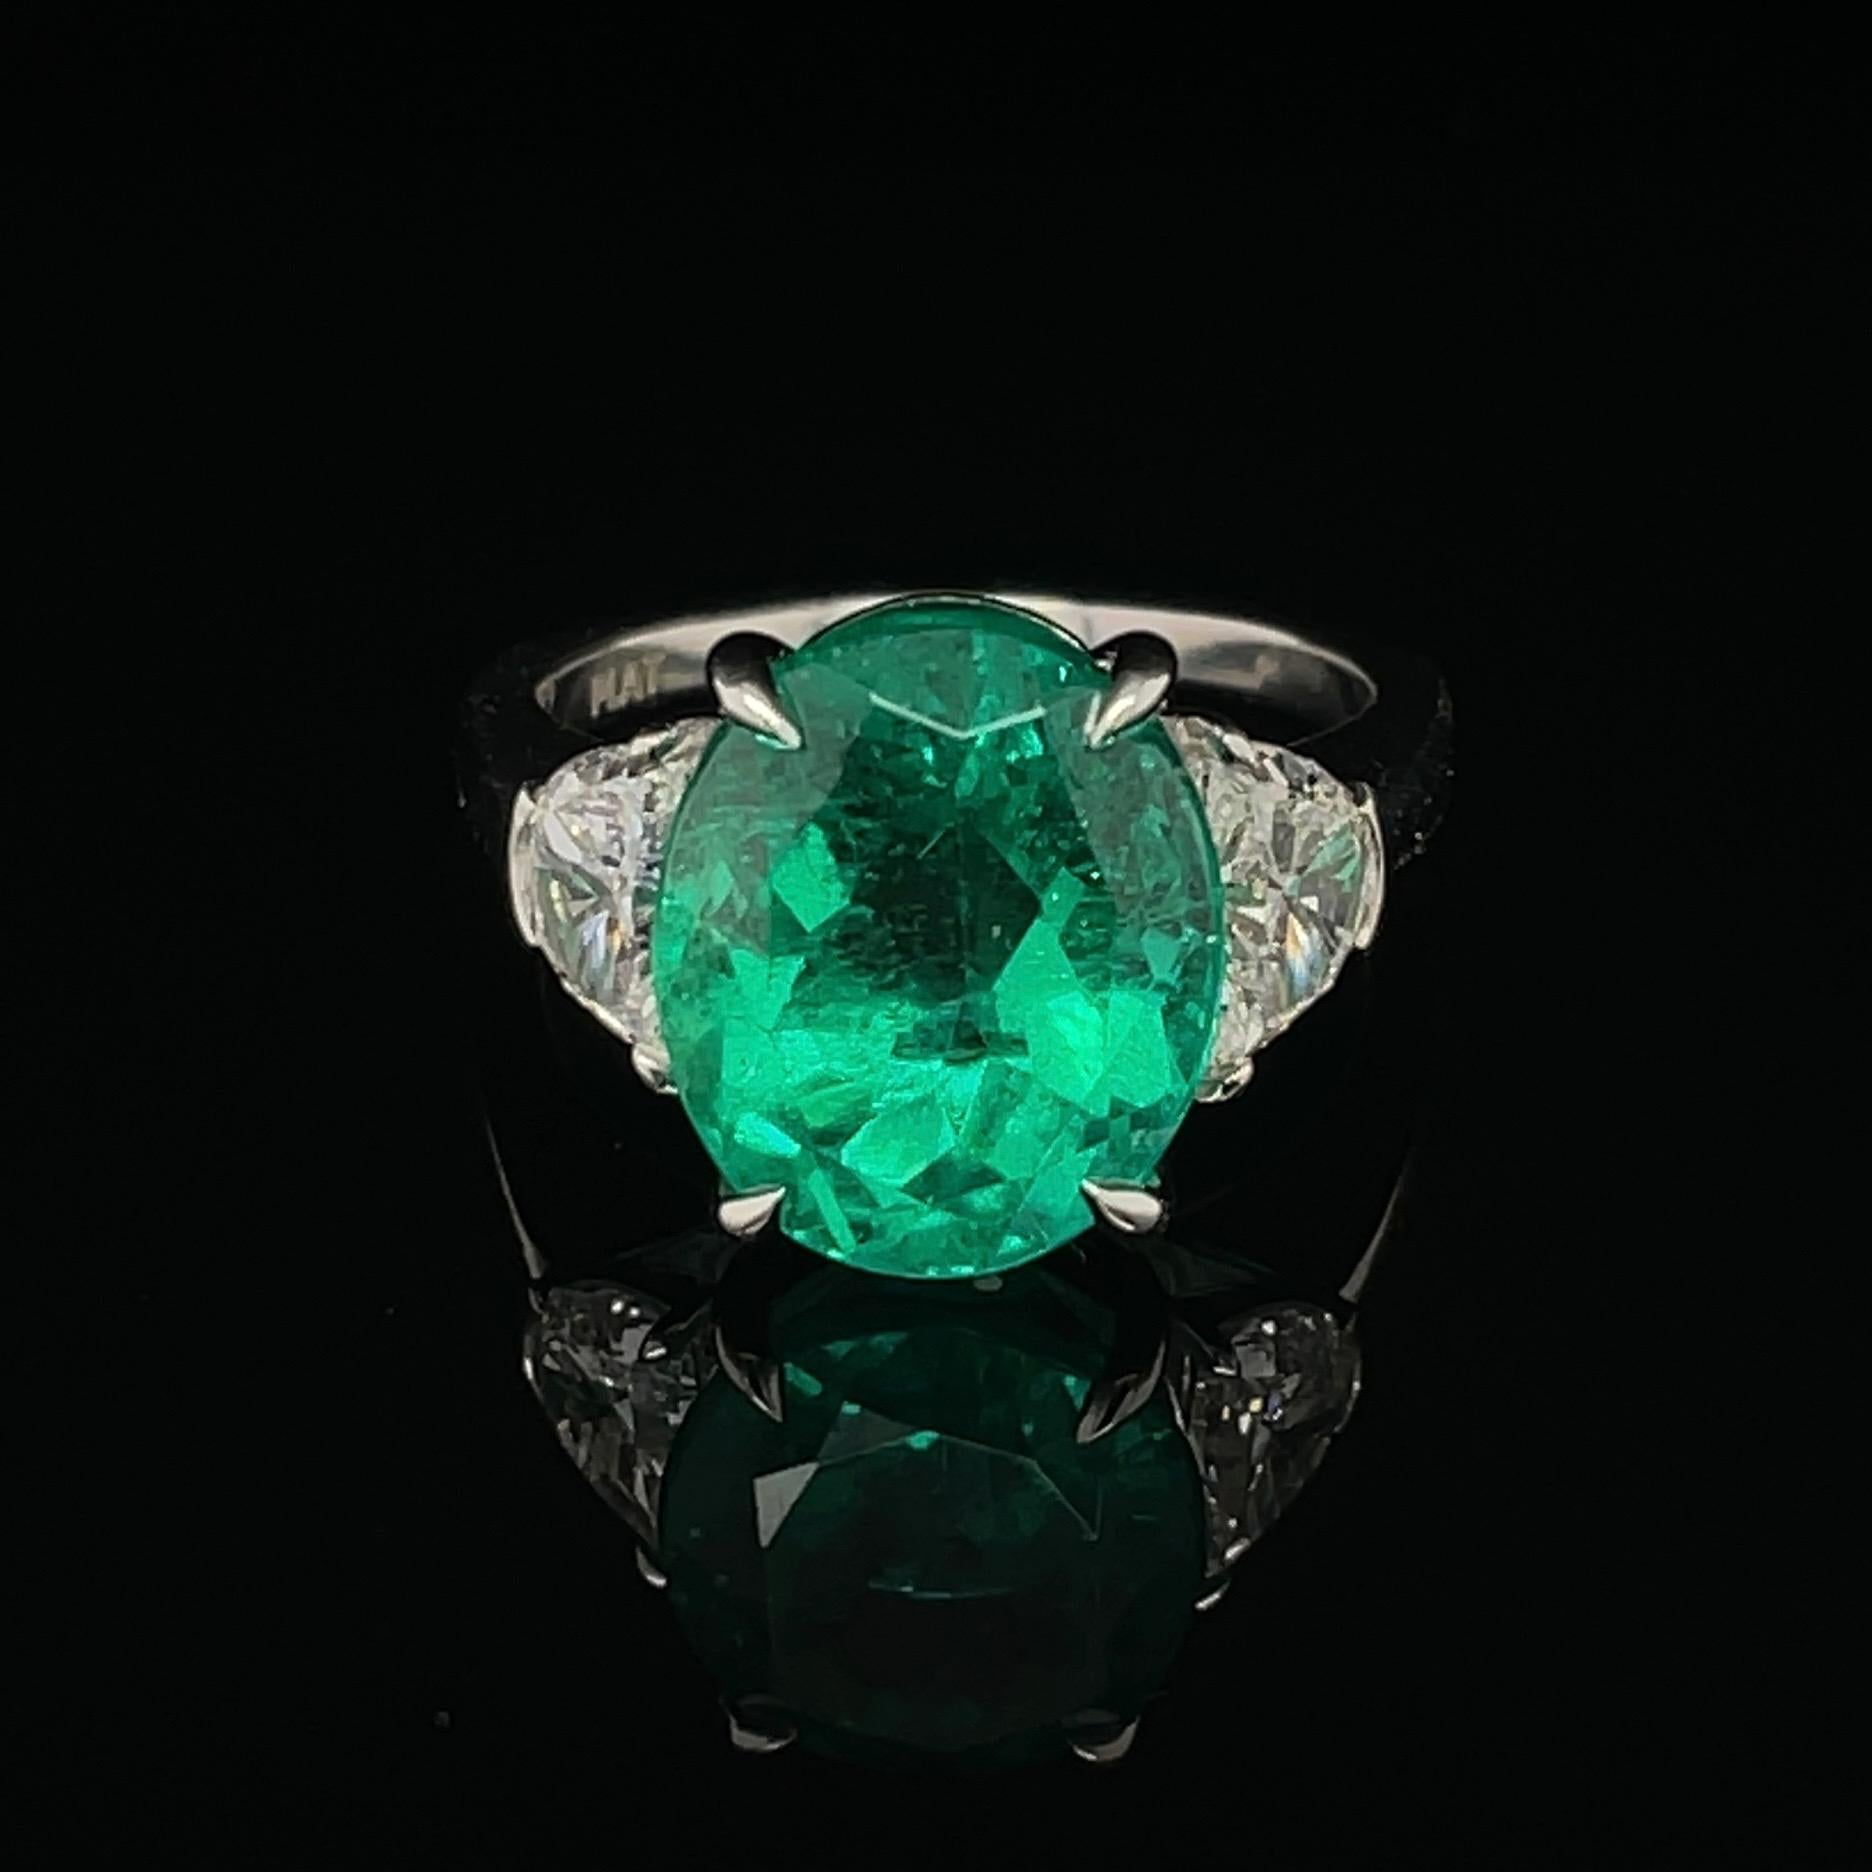 This beautiful 5.60ct Oval Green Emerald is set in platinum with 2 half moon diamonds = 0.90cttw

CDC # 1811322